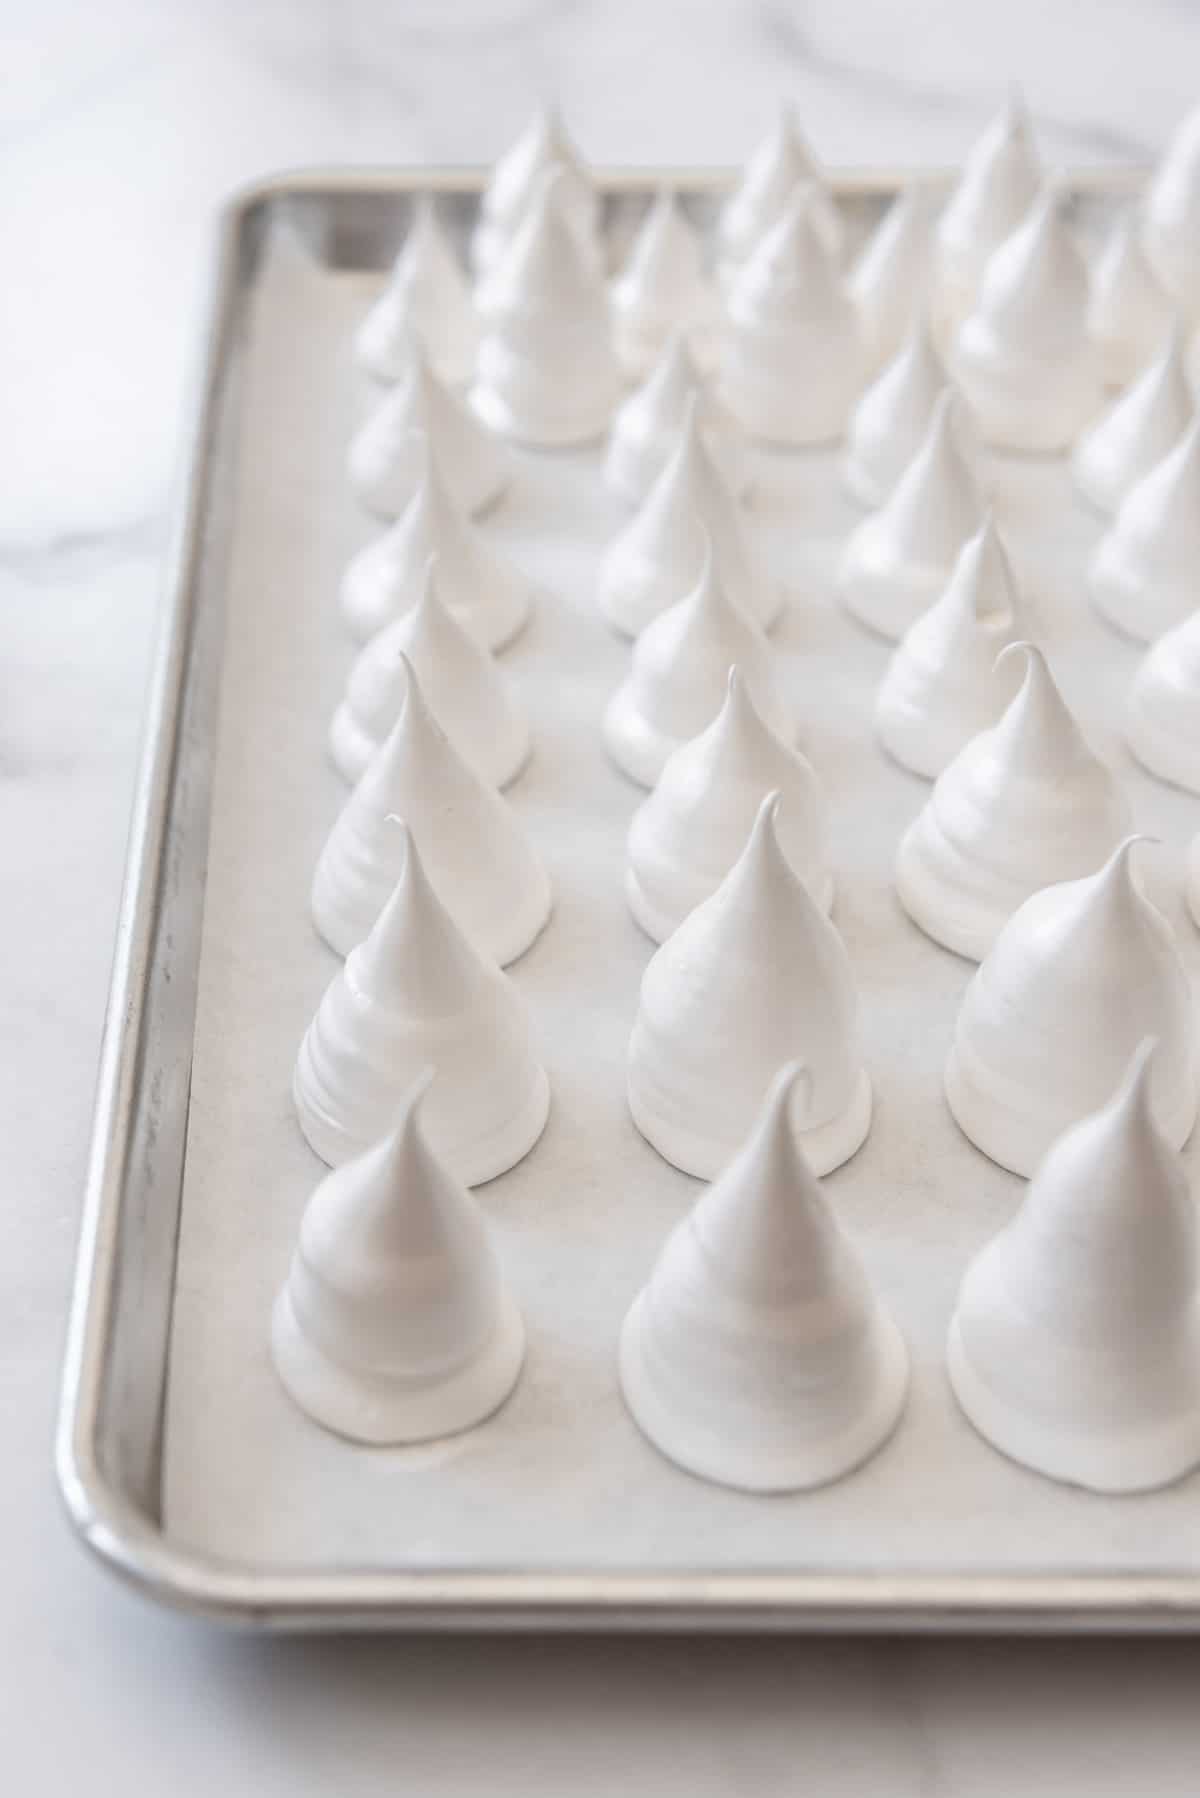 Mounds of piped meringue on a baking sheet.